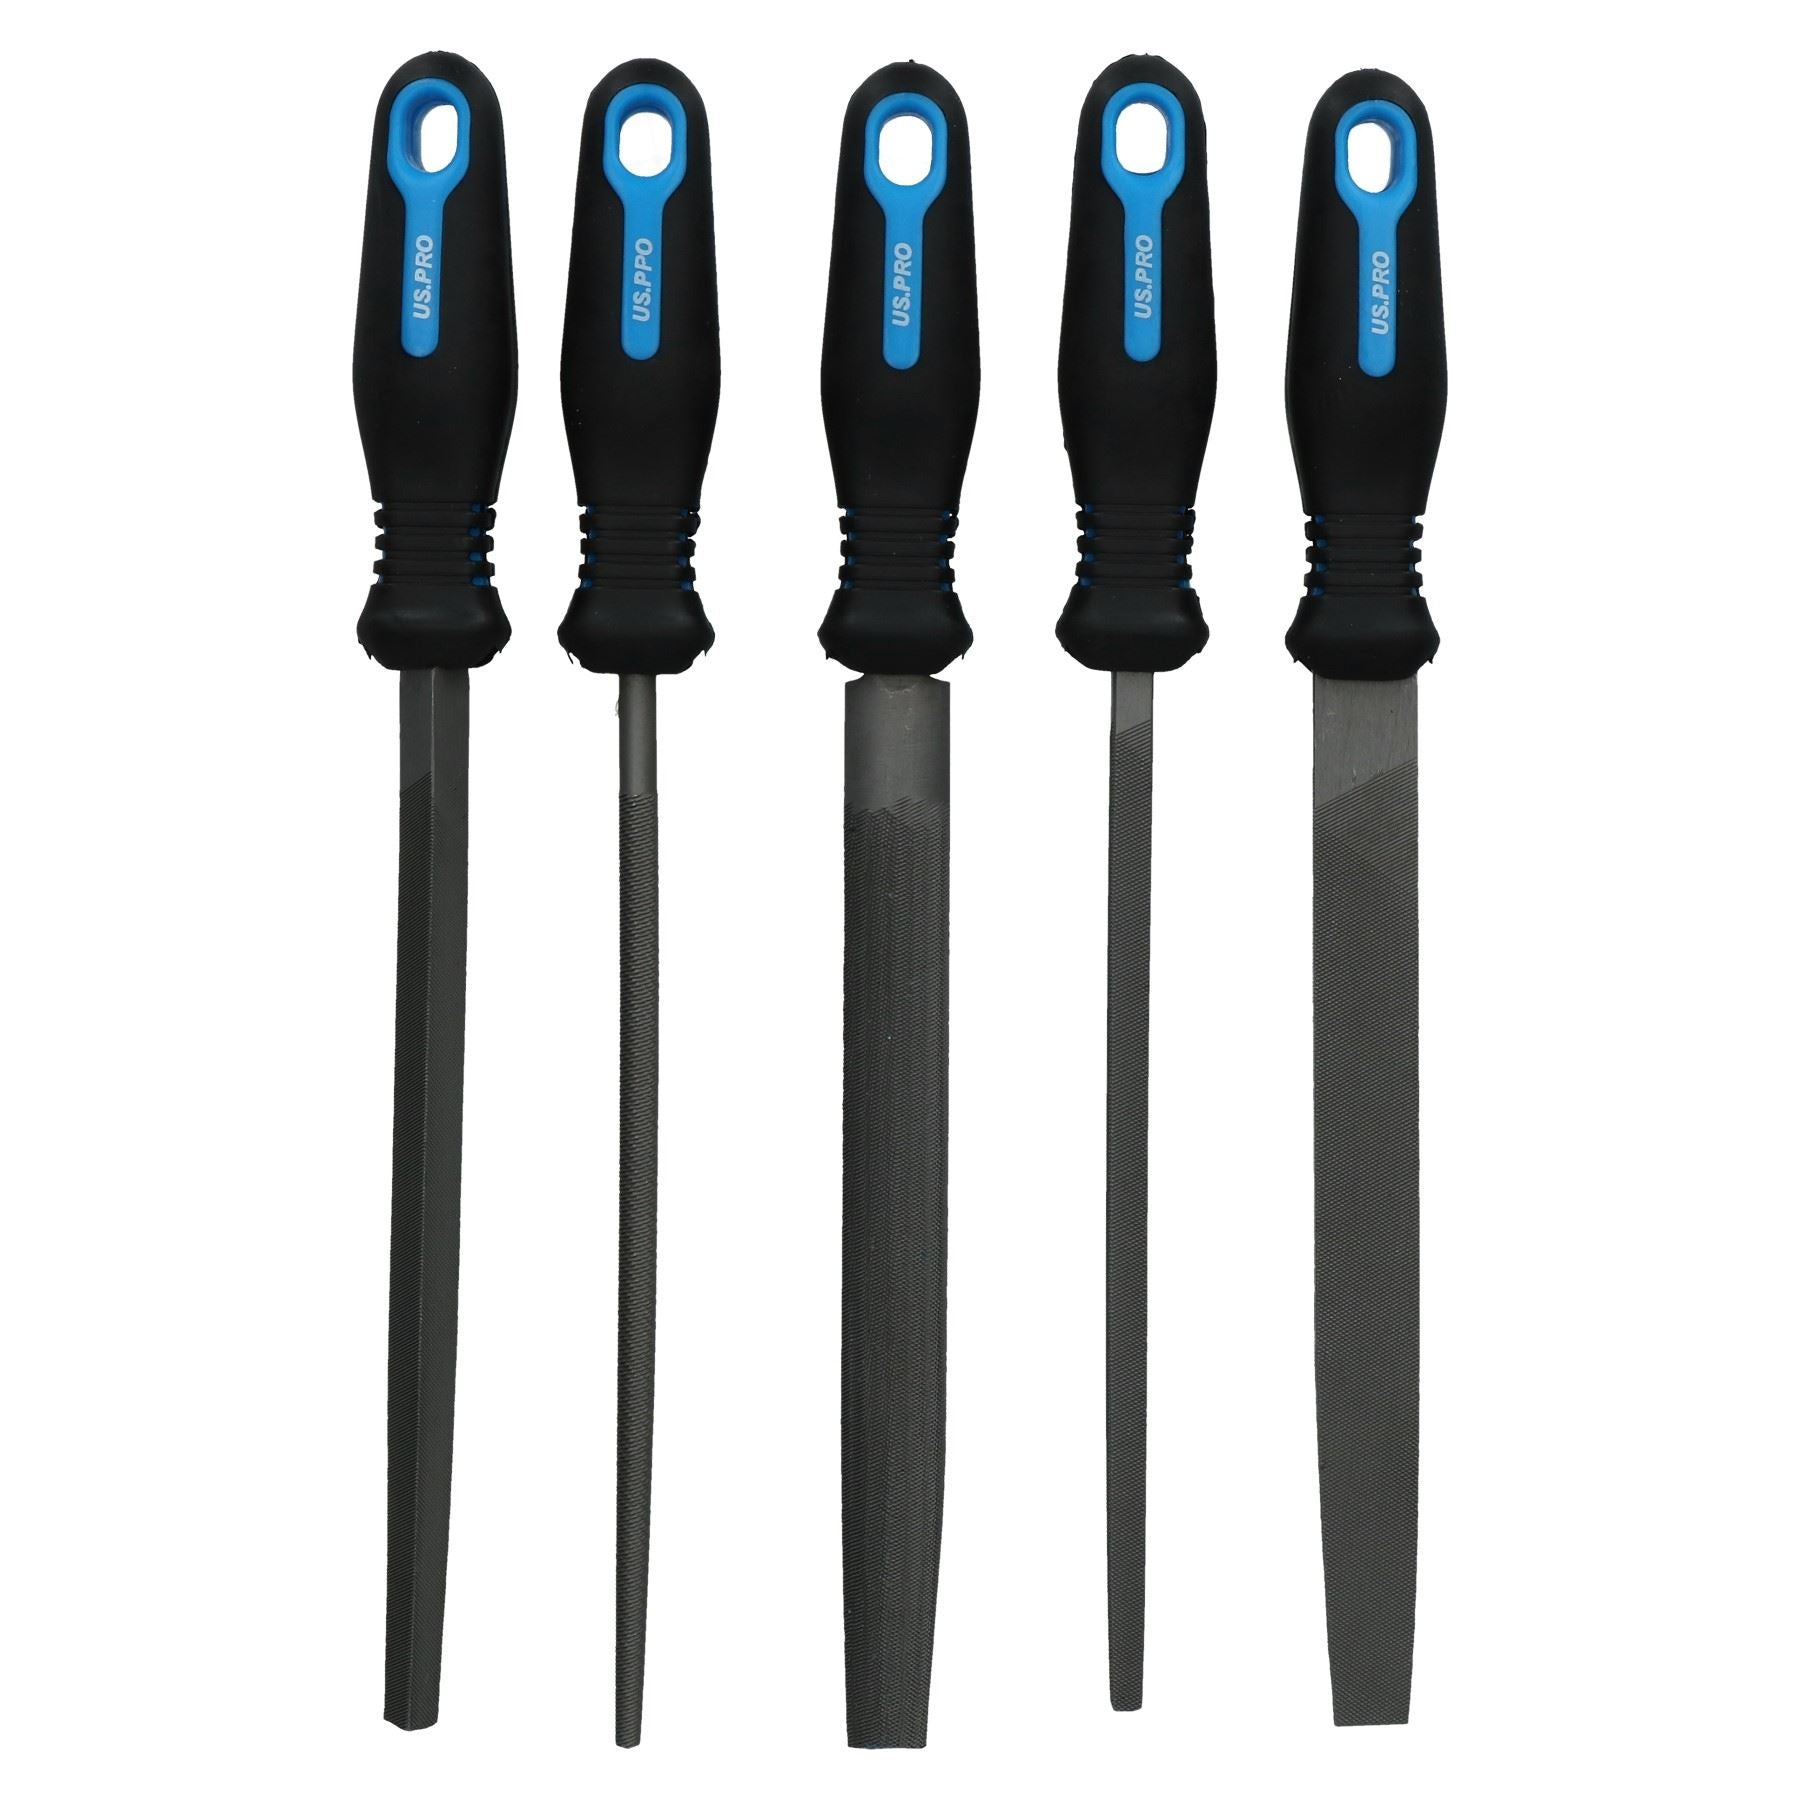 Engineers Metal File Set With Soft Rubber Handles 5pc AT793